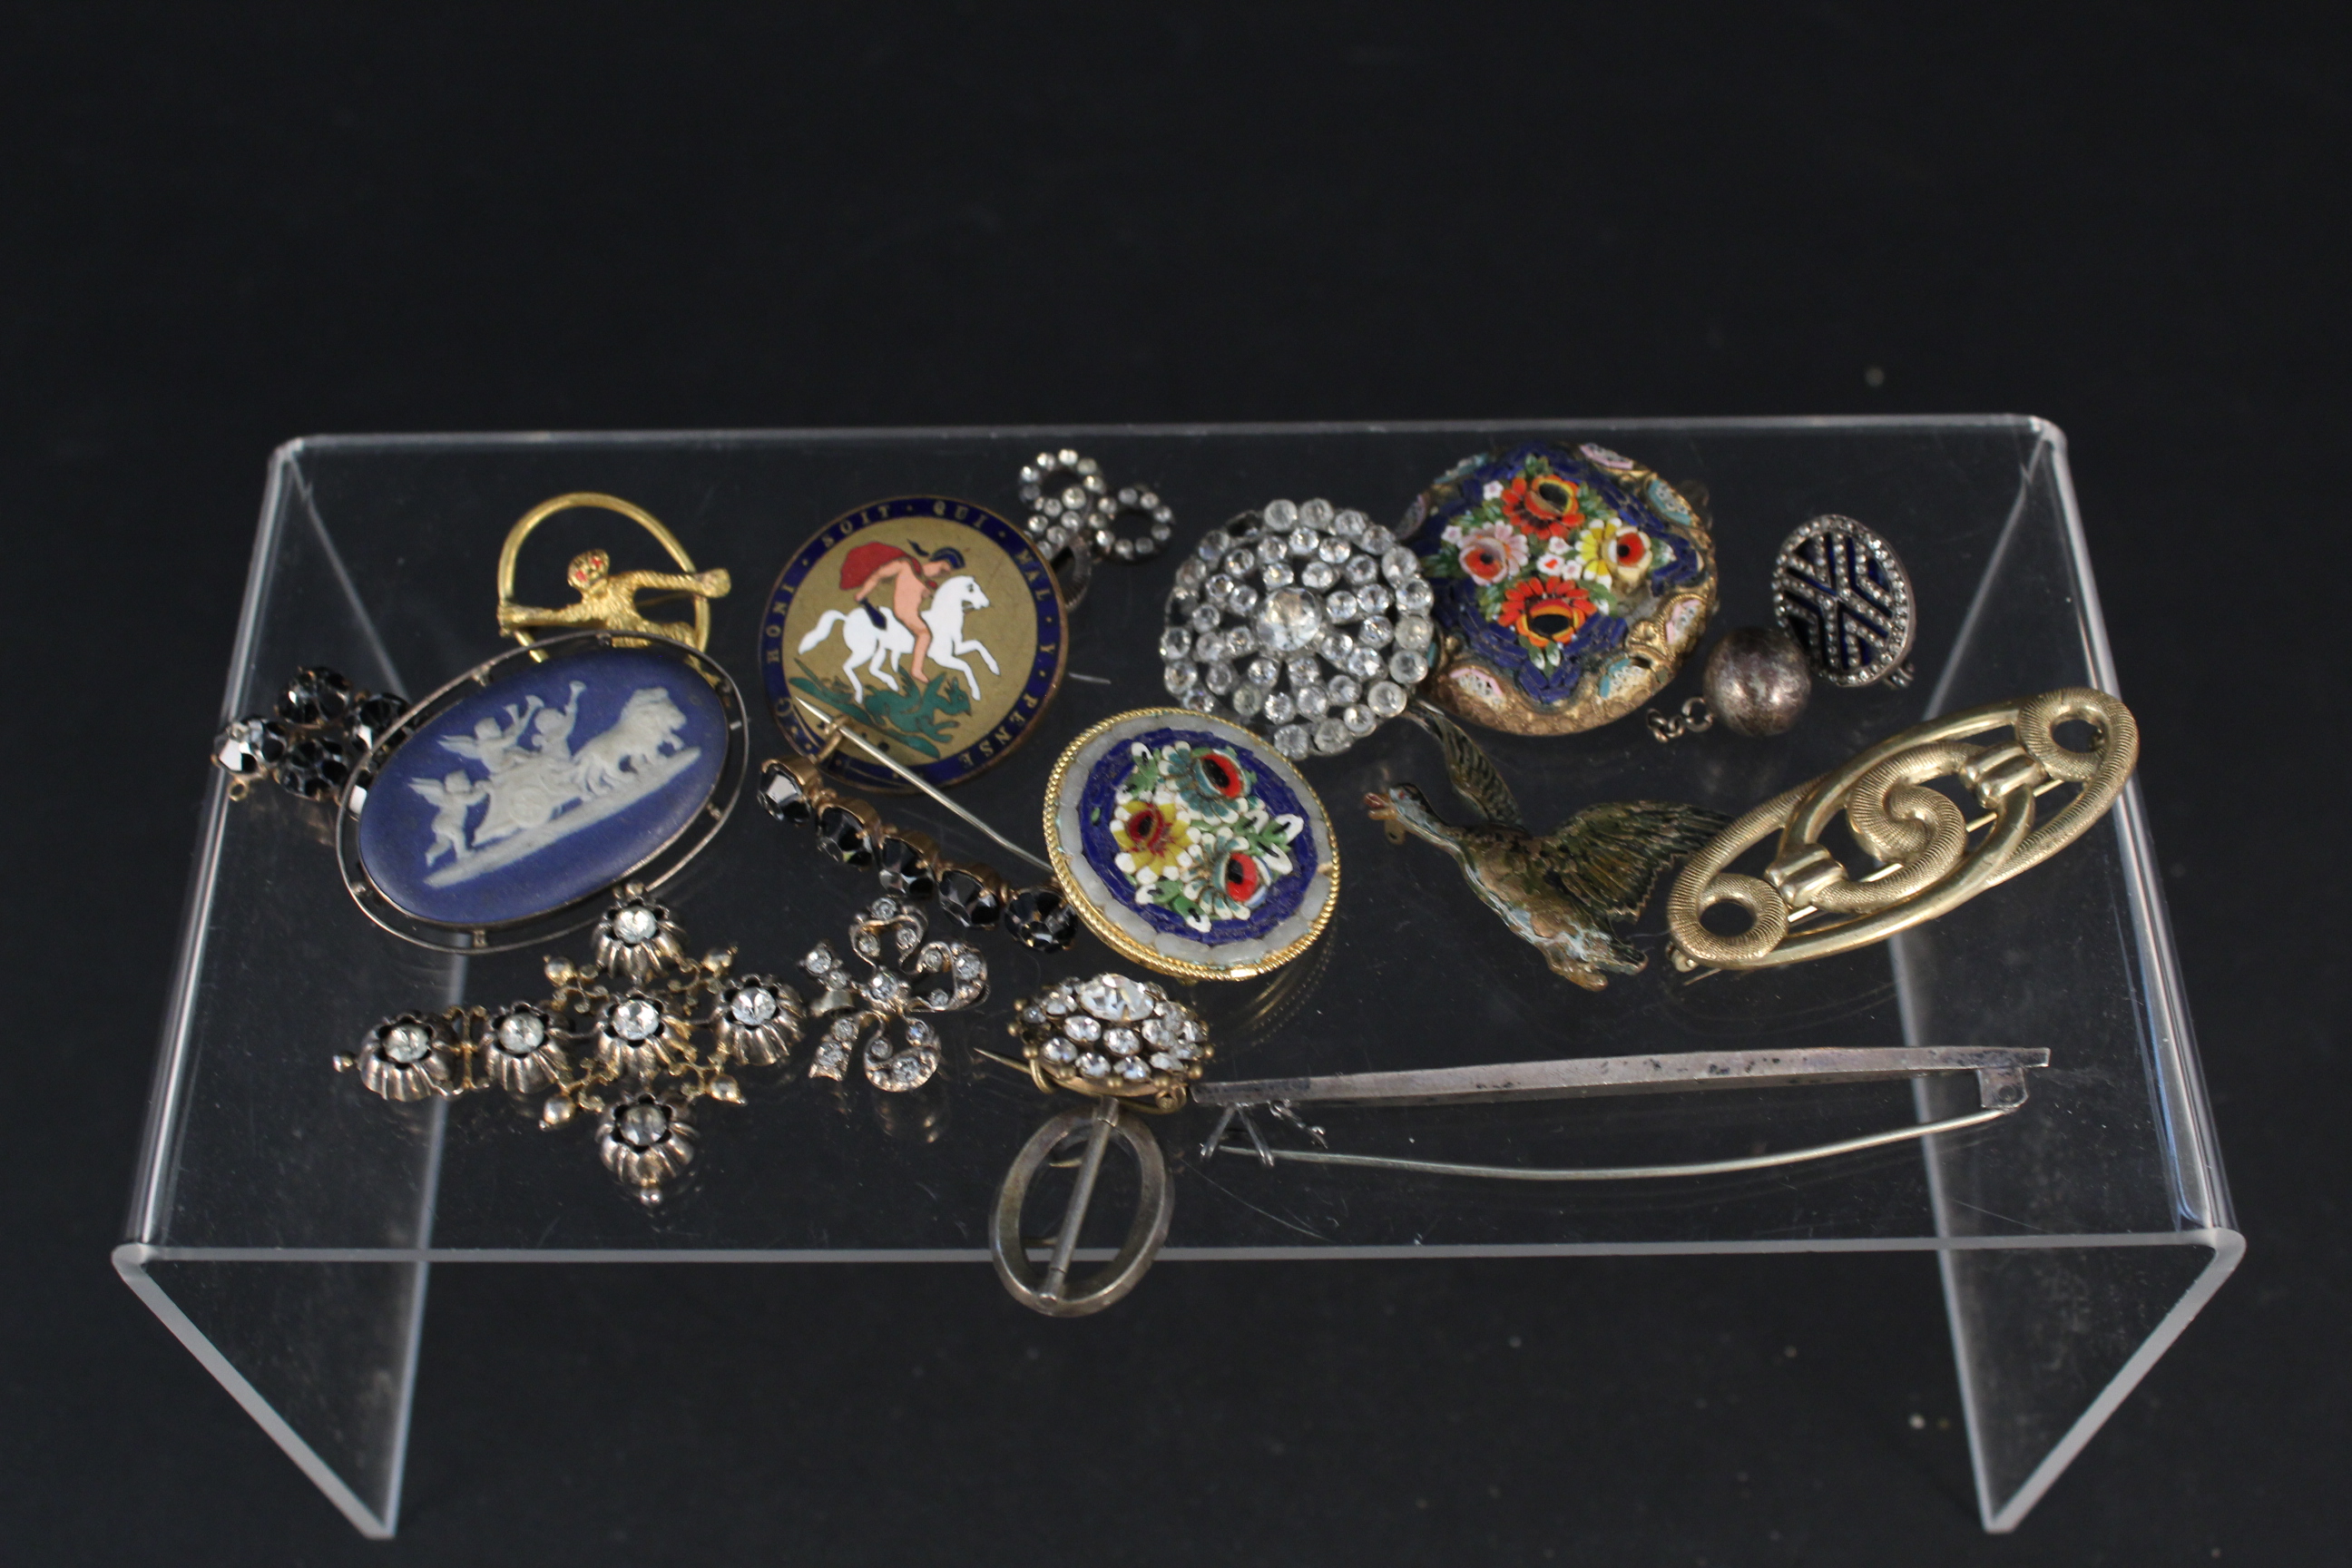 Mixed brooches, most of which are costume jewellery, various styles including paste set,